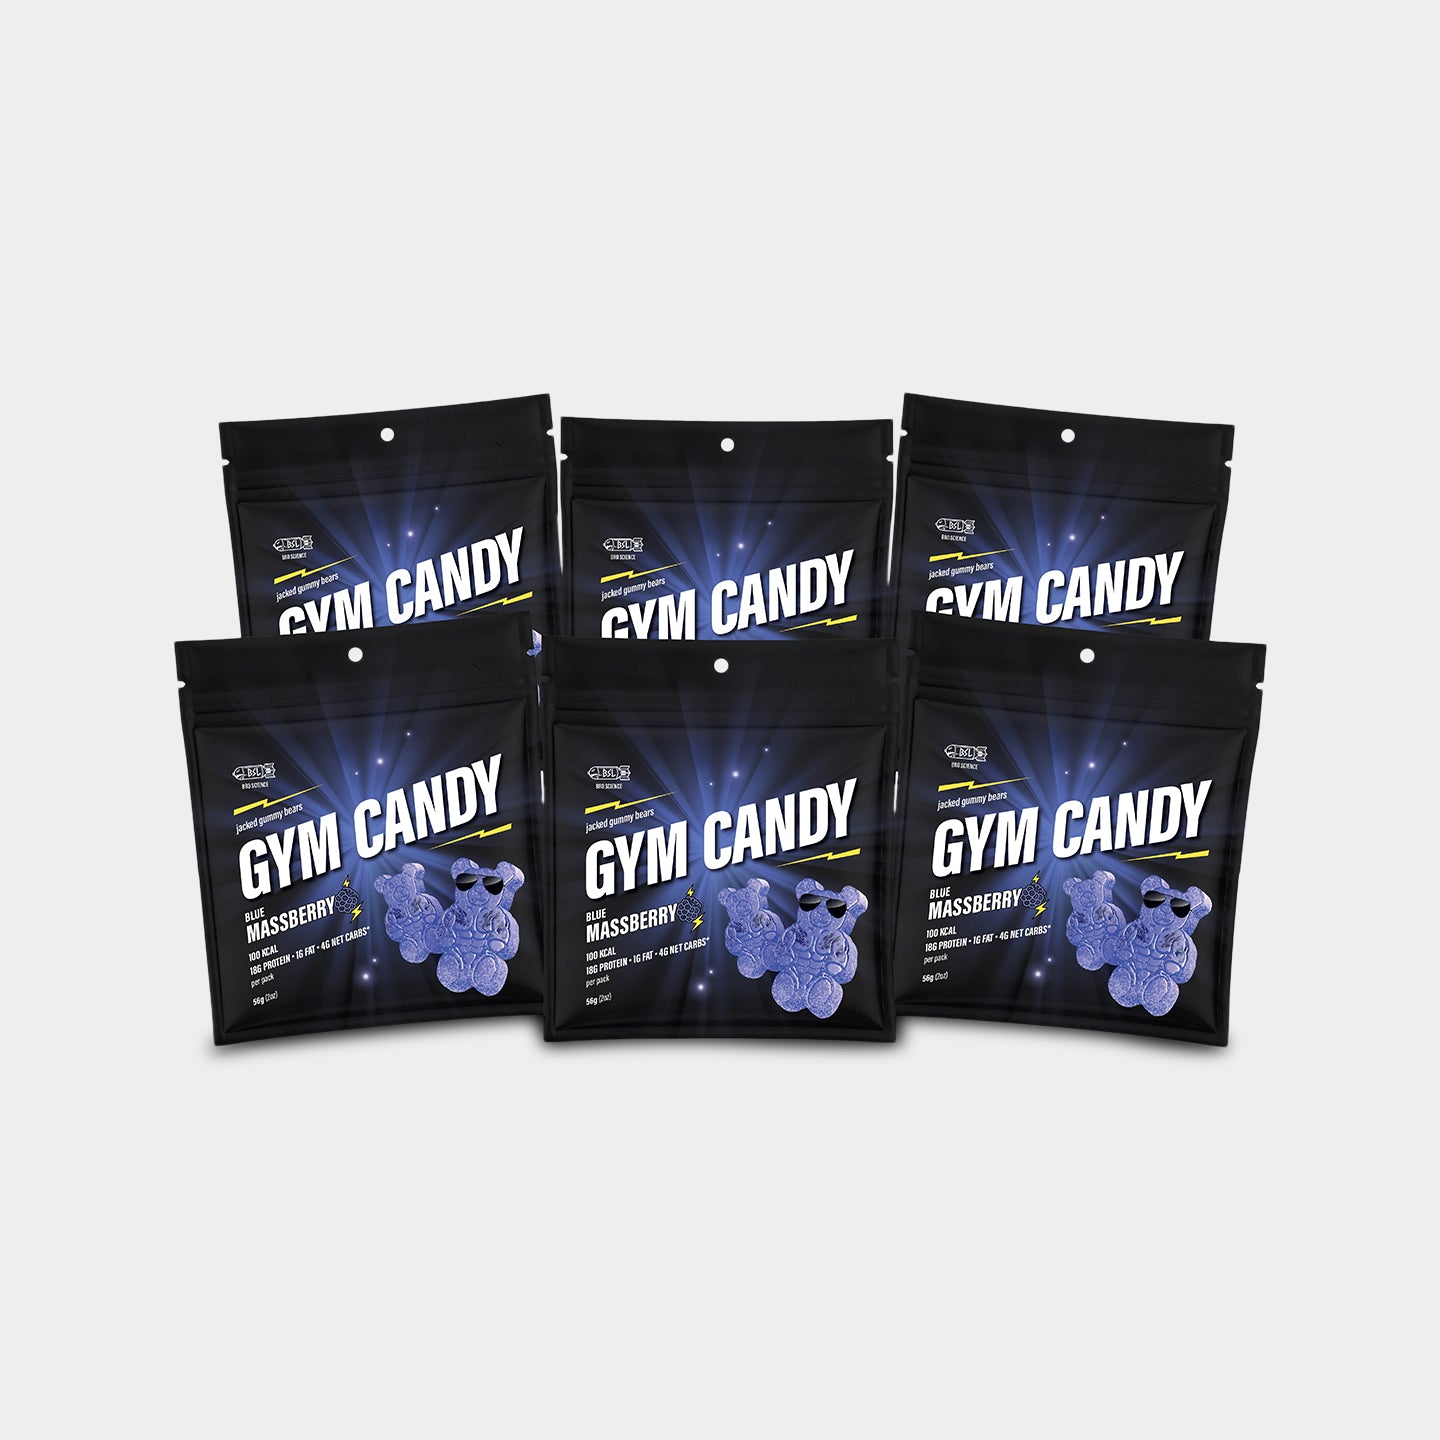 Gym Candy Jacked Gummy Bears, Blue Massberry, 2oz - 6 Pack A1